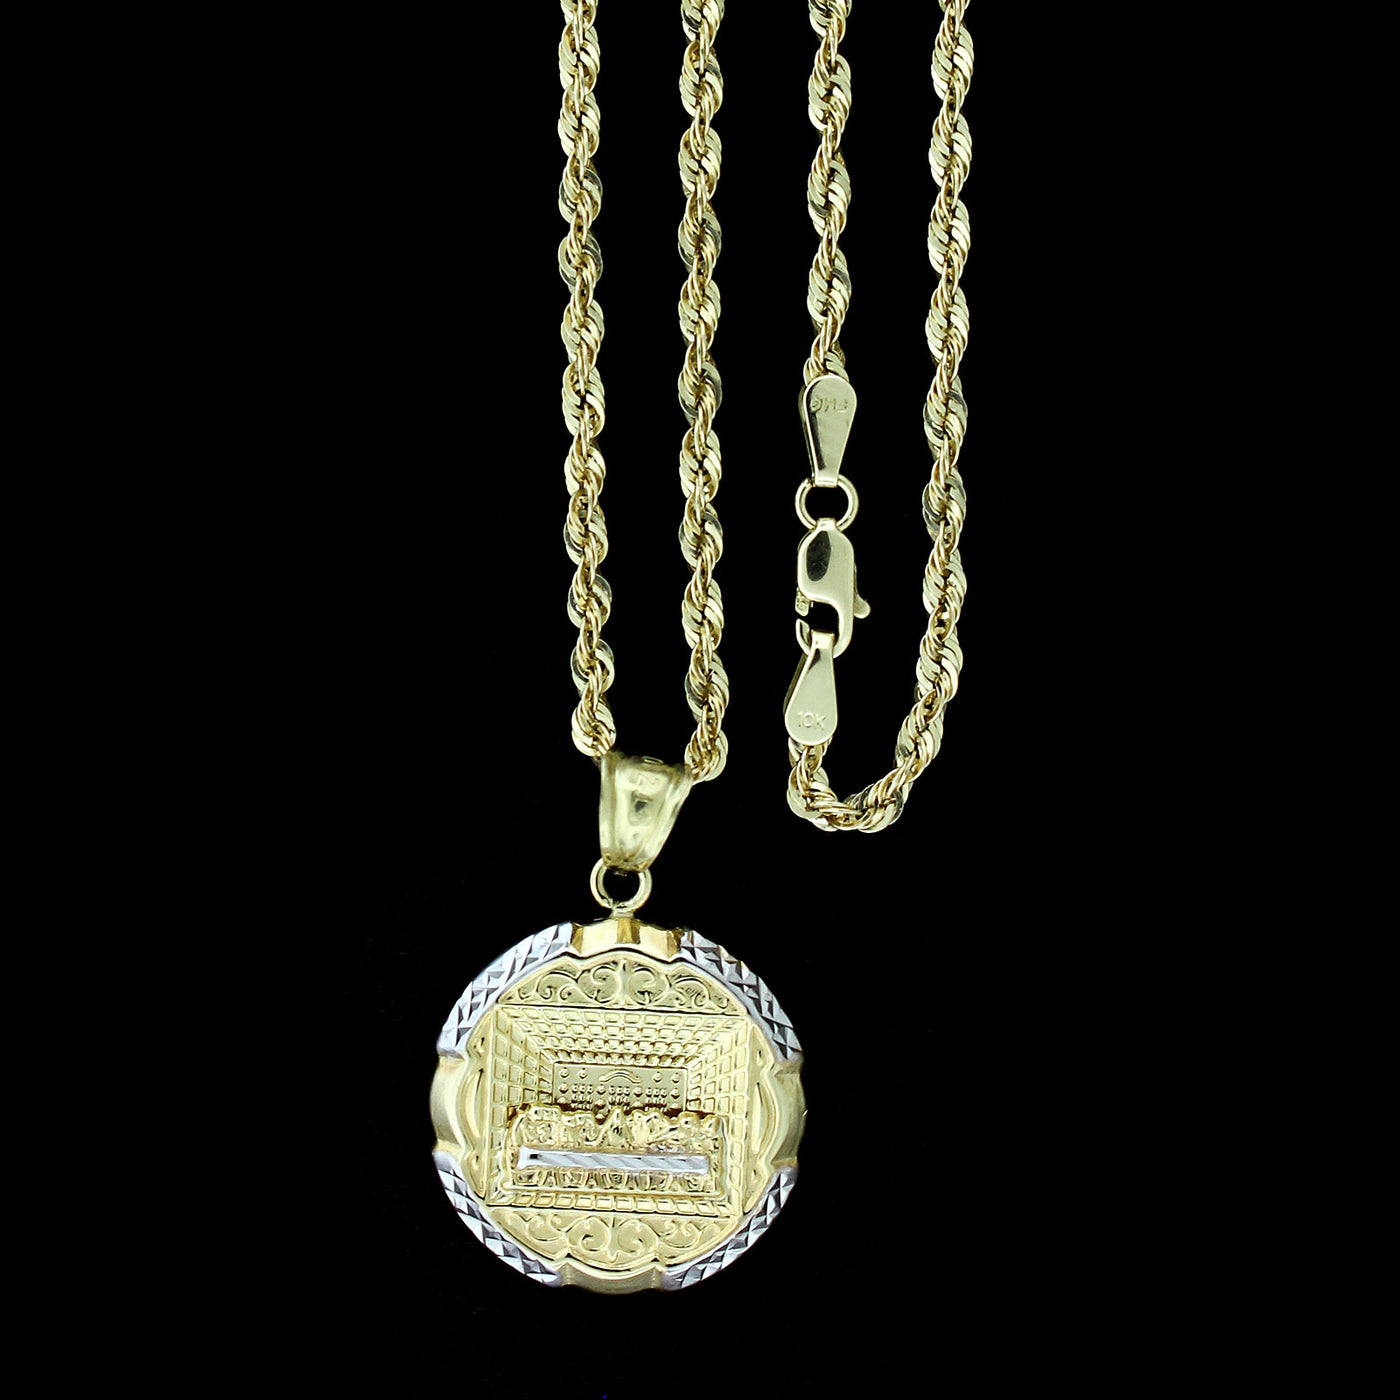 Real 10K Yellow Gold Apostles Last Supper Charm Pendant & 2.5mm Rope Chain Necklace Set